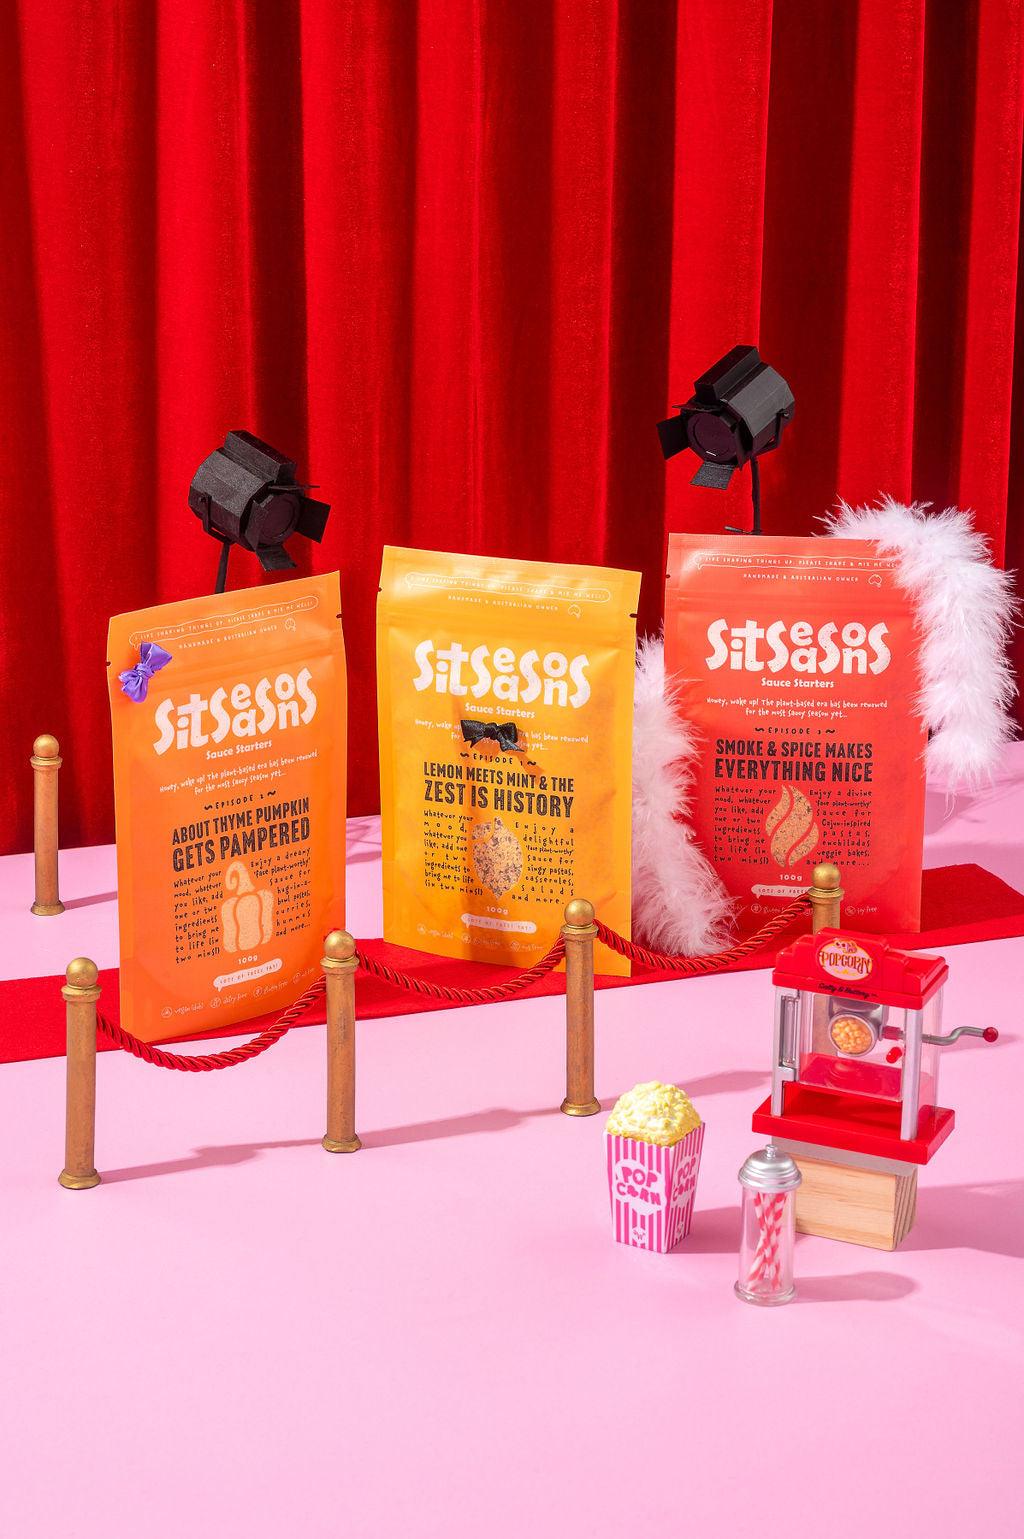 Vegan sauce packets posing on a red carpet with surrounding gold bollards